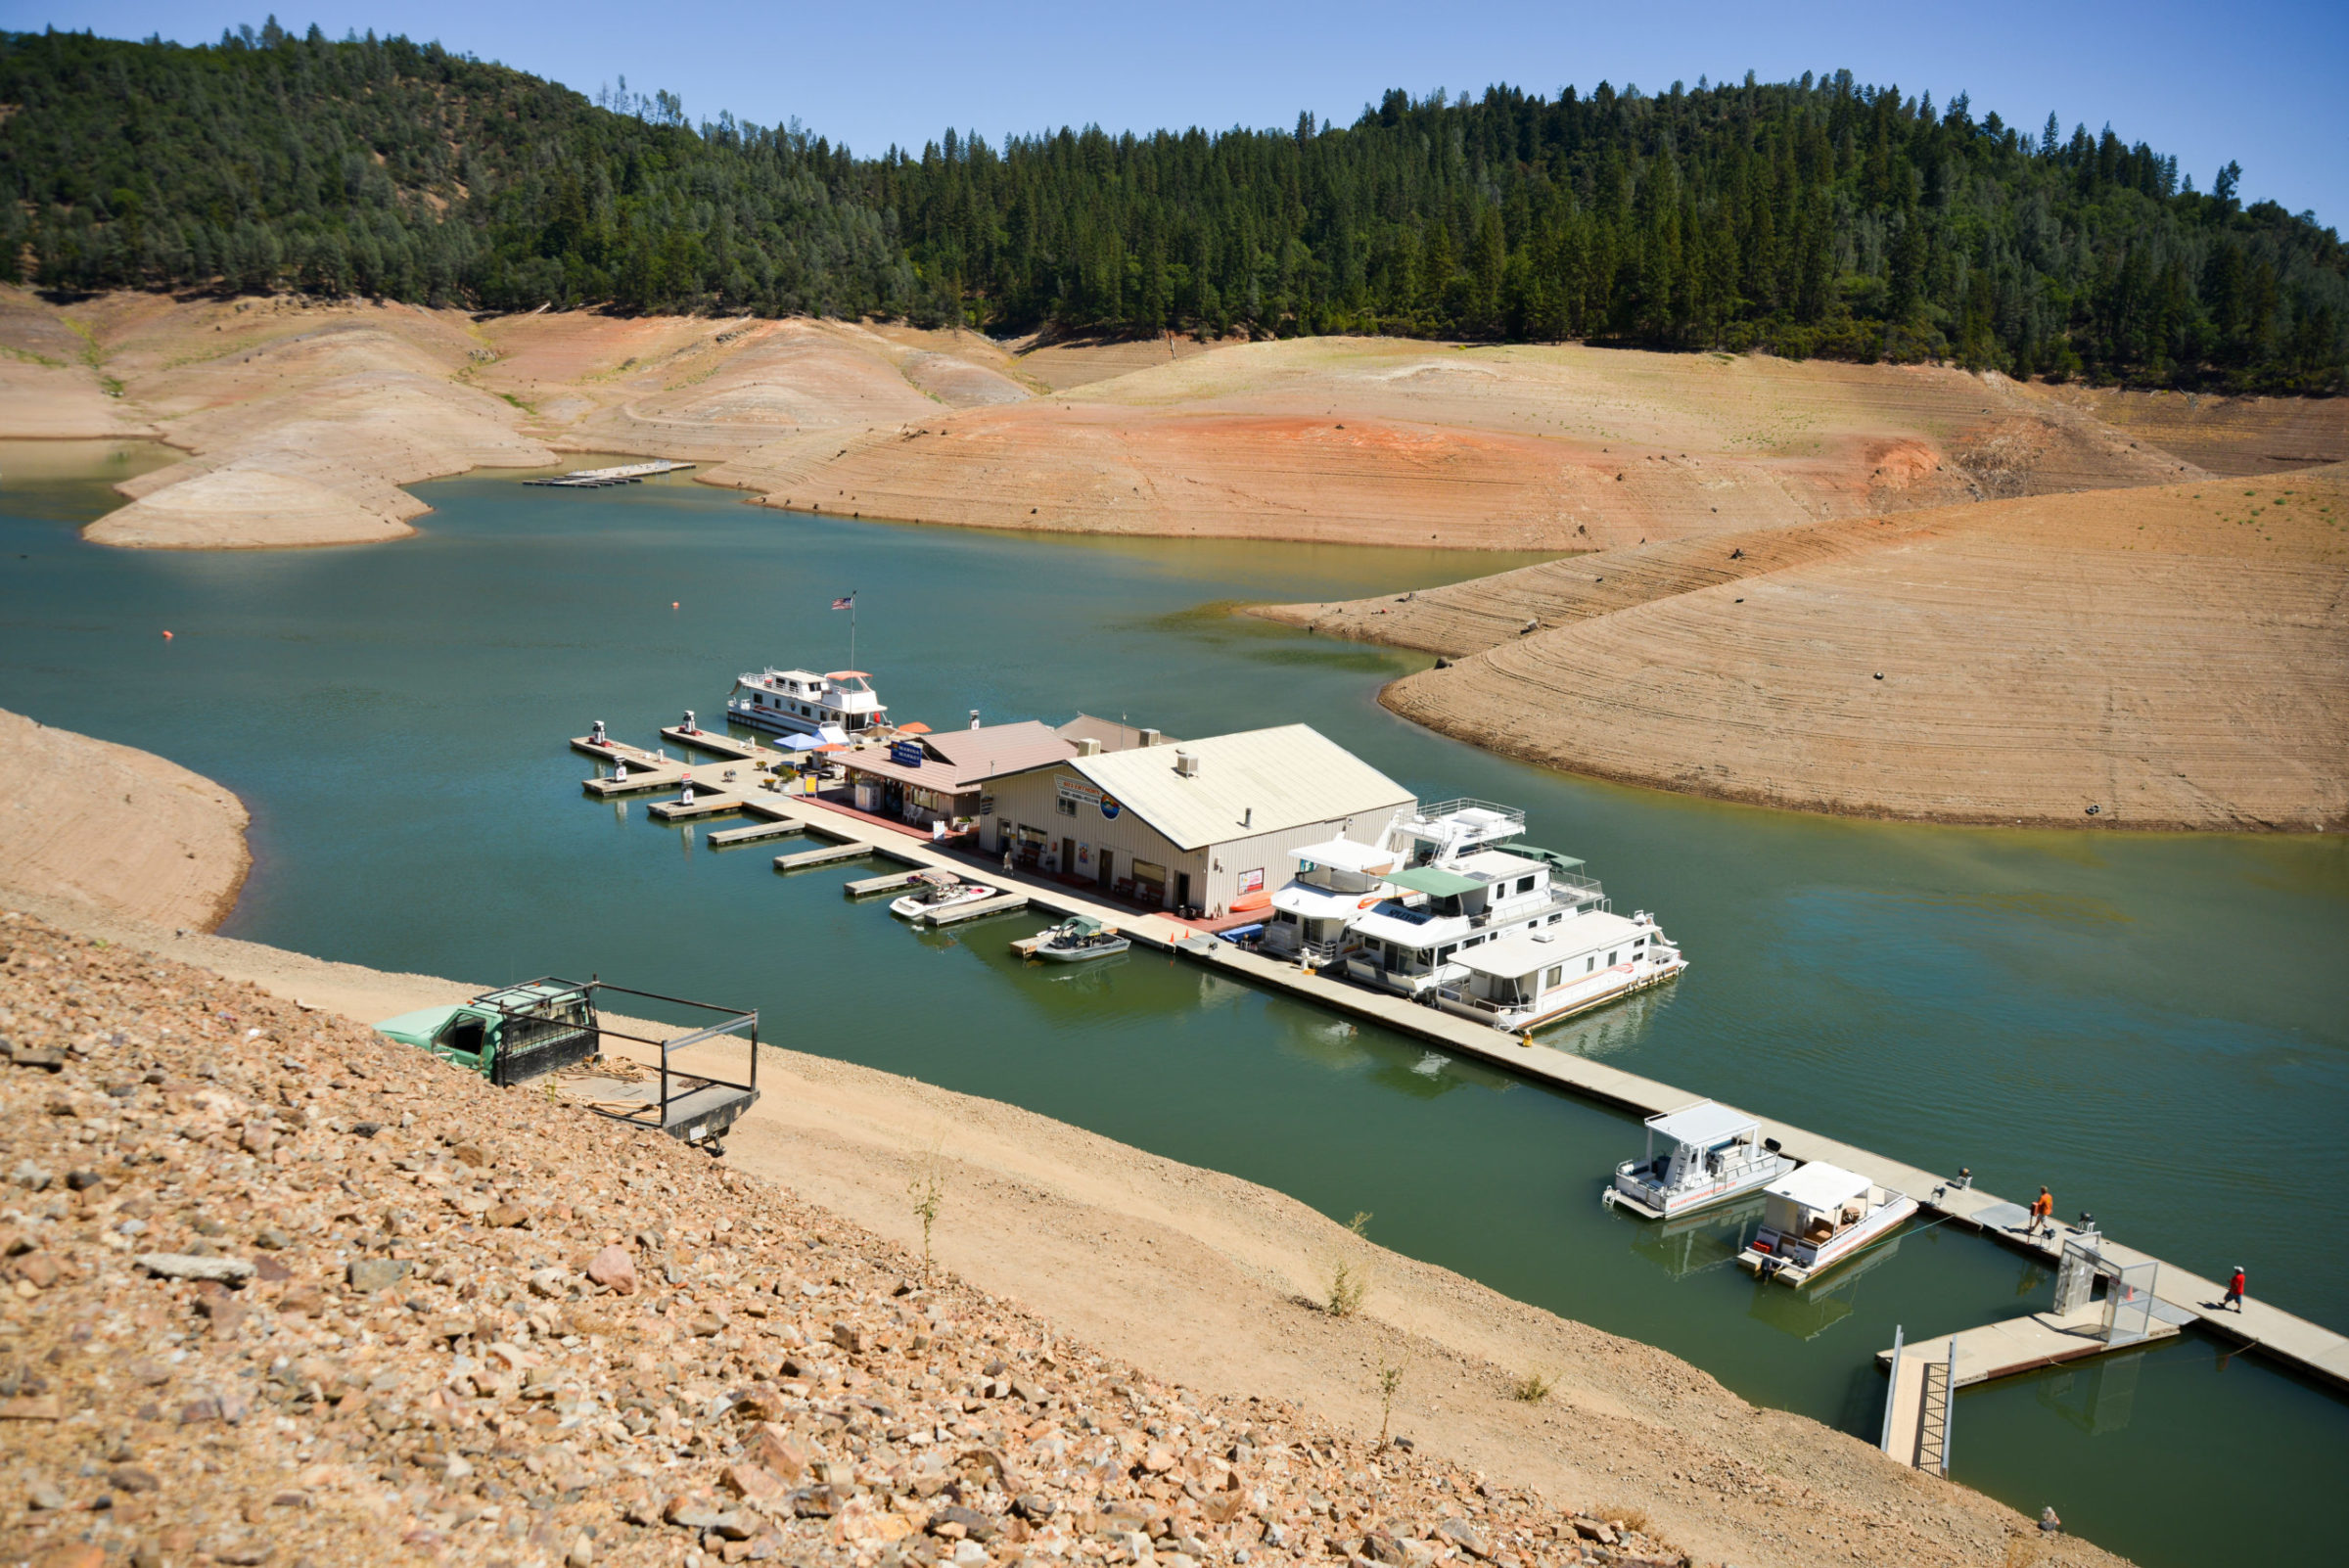 Lake Shasta Lowest Water Level in Decades